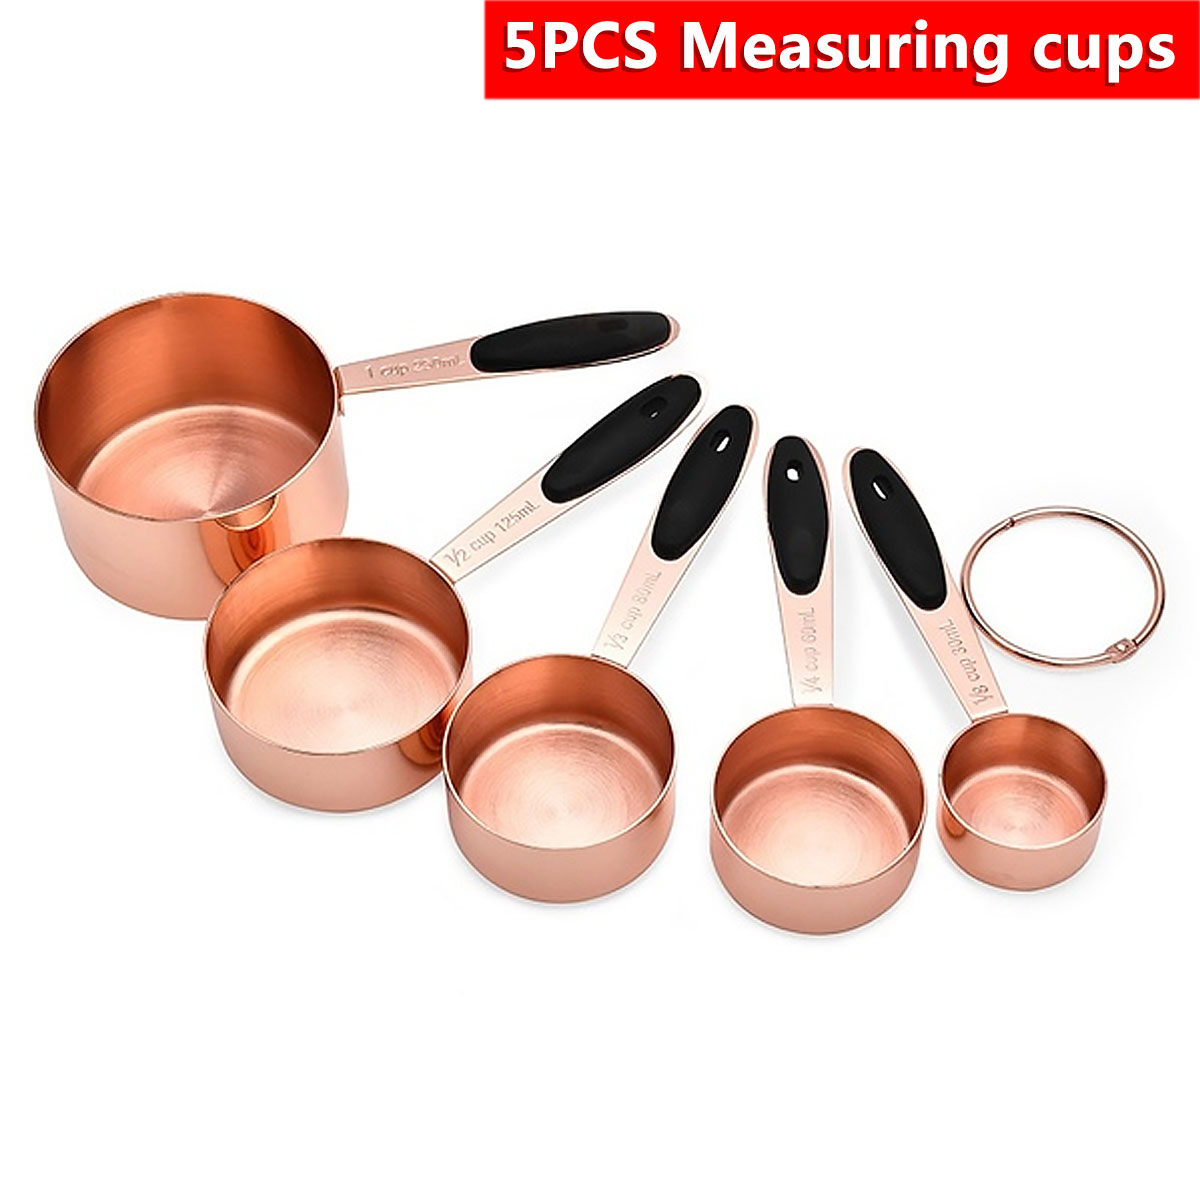 5Pcs-Measuring-Cup-Set-Stainless-Steel-Kitchen-Accessories-Baking-Bartending-Tools-1722150-4